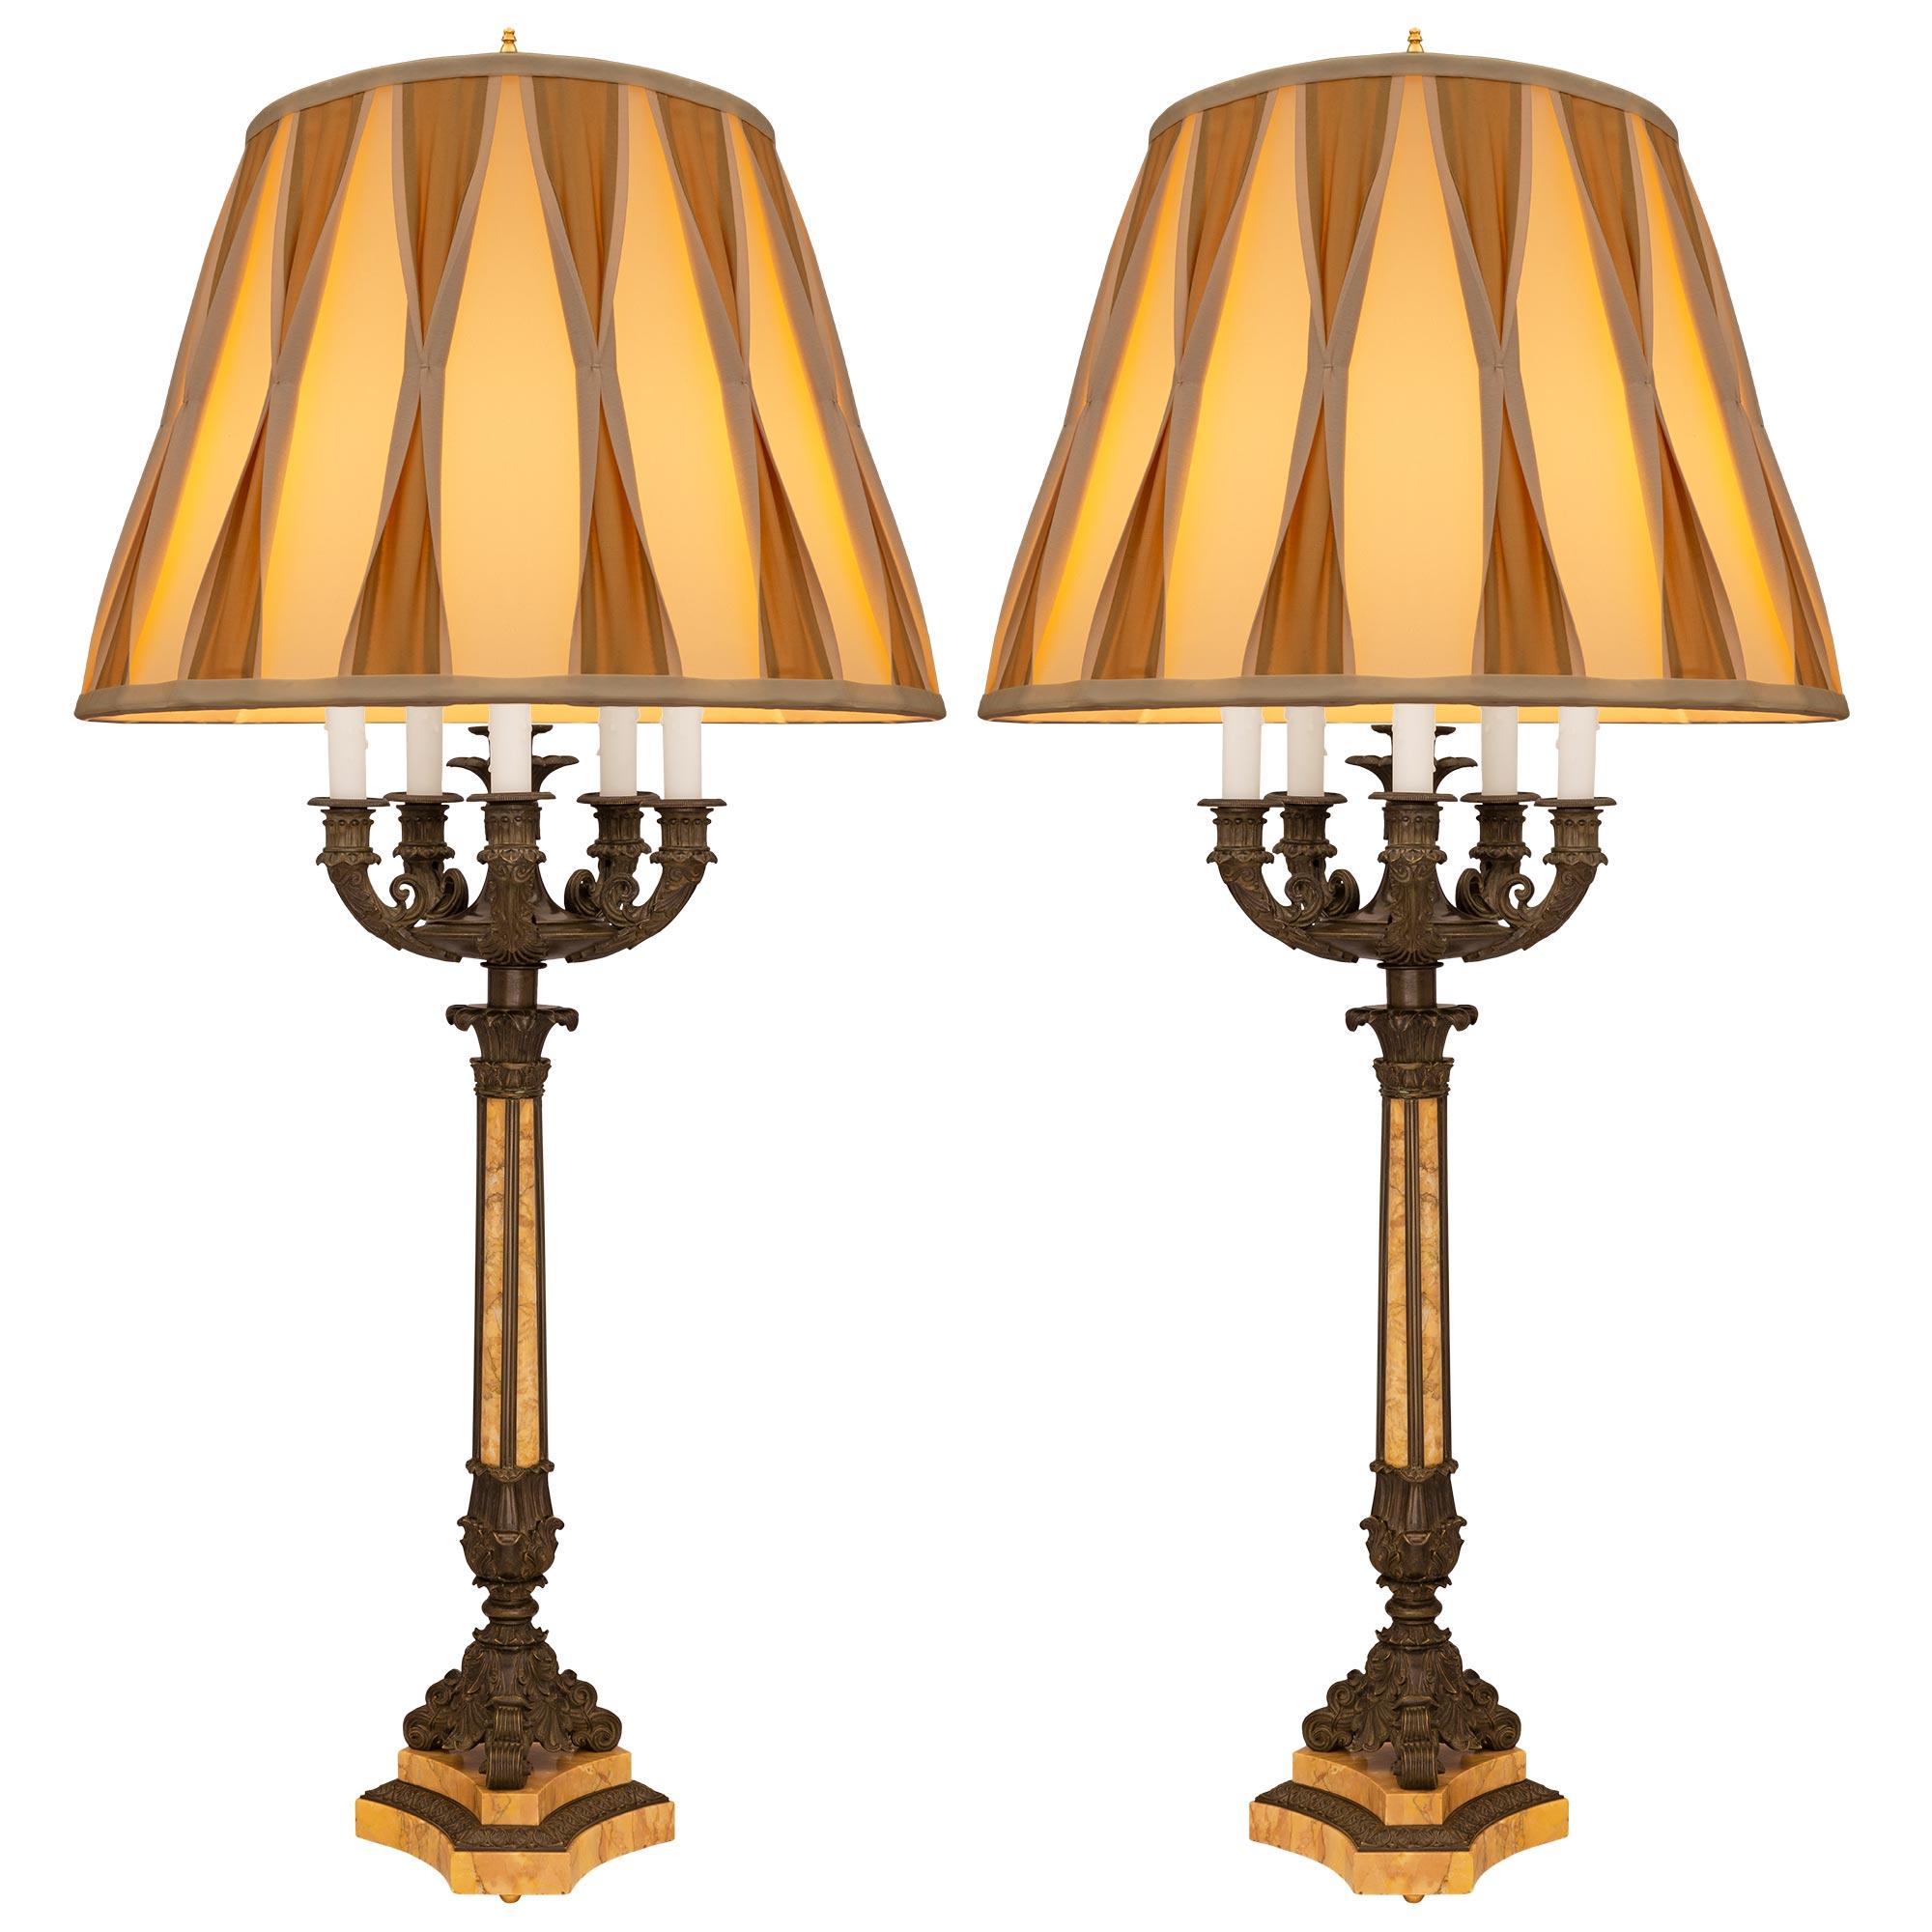 A sensational and large-scale pair of French 19th century Restauration period seven light patinated bronze and marble candelabra lamps. Each five-arm candelabras is raised on a triangular sienna marble base with concave sides and cut corners below a